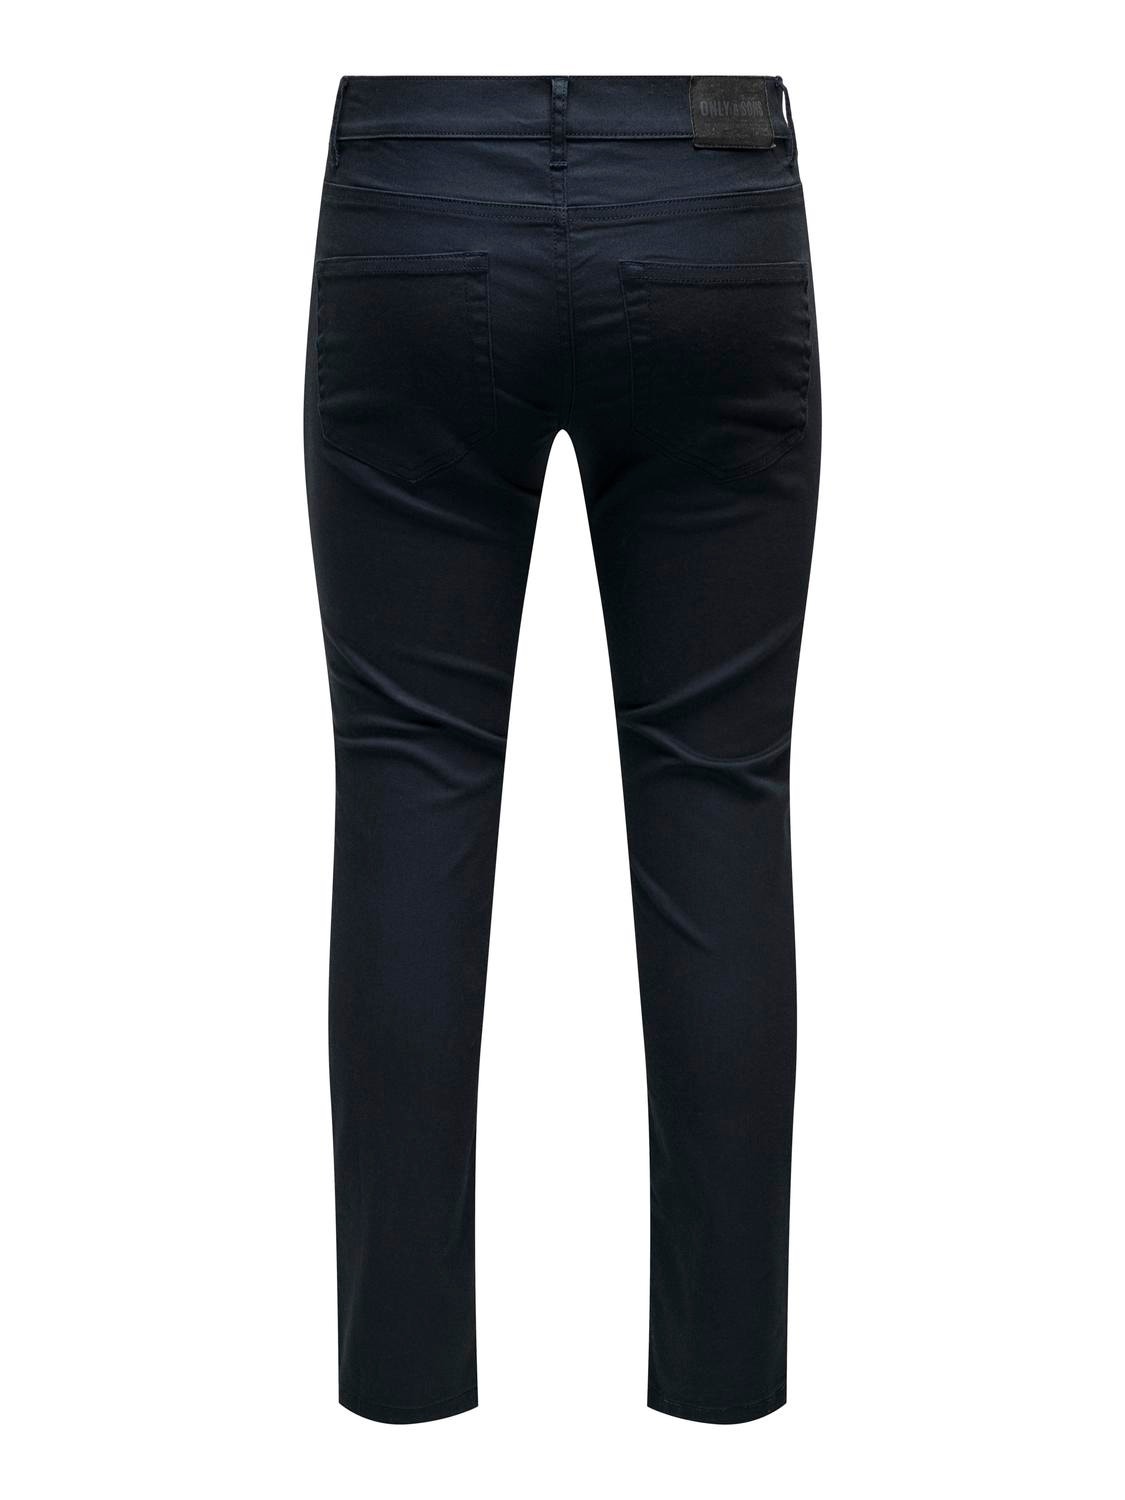 ONLY & SONS Slim Fit Trousers -Dark Navy - 22024452